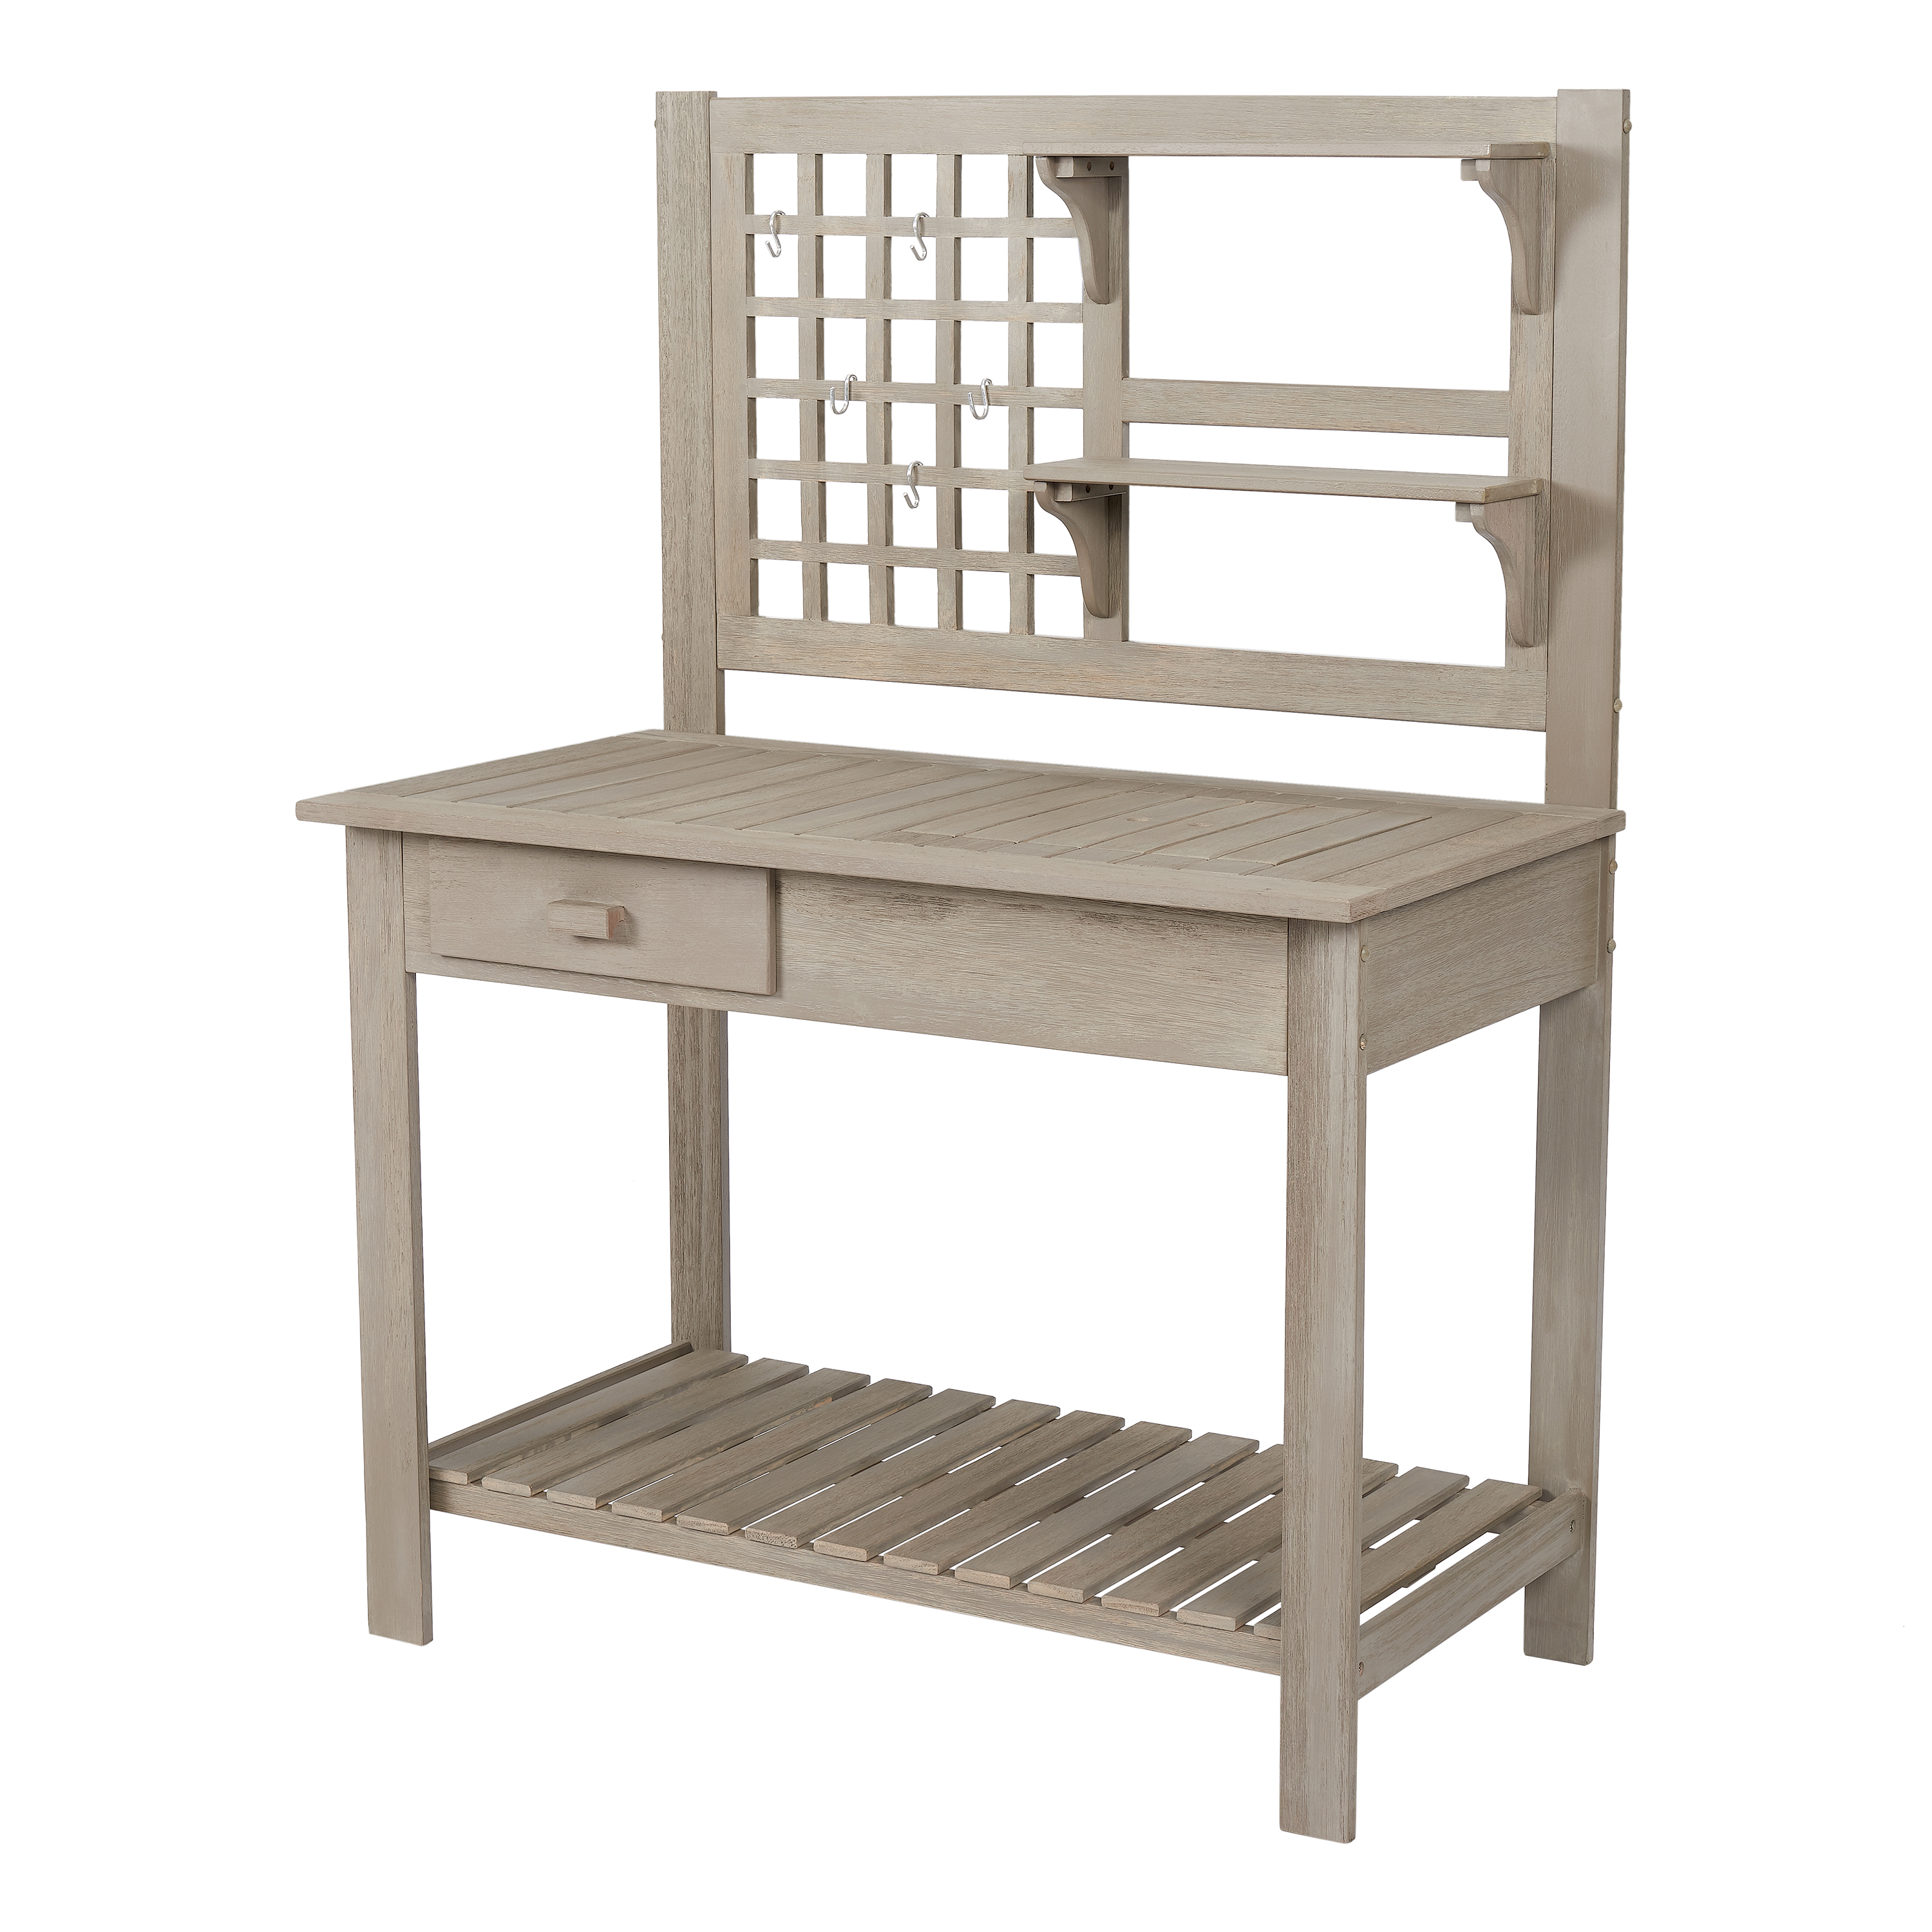 Better Homes & Gardens Gray Wood Potting Bench - image 2 of 8